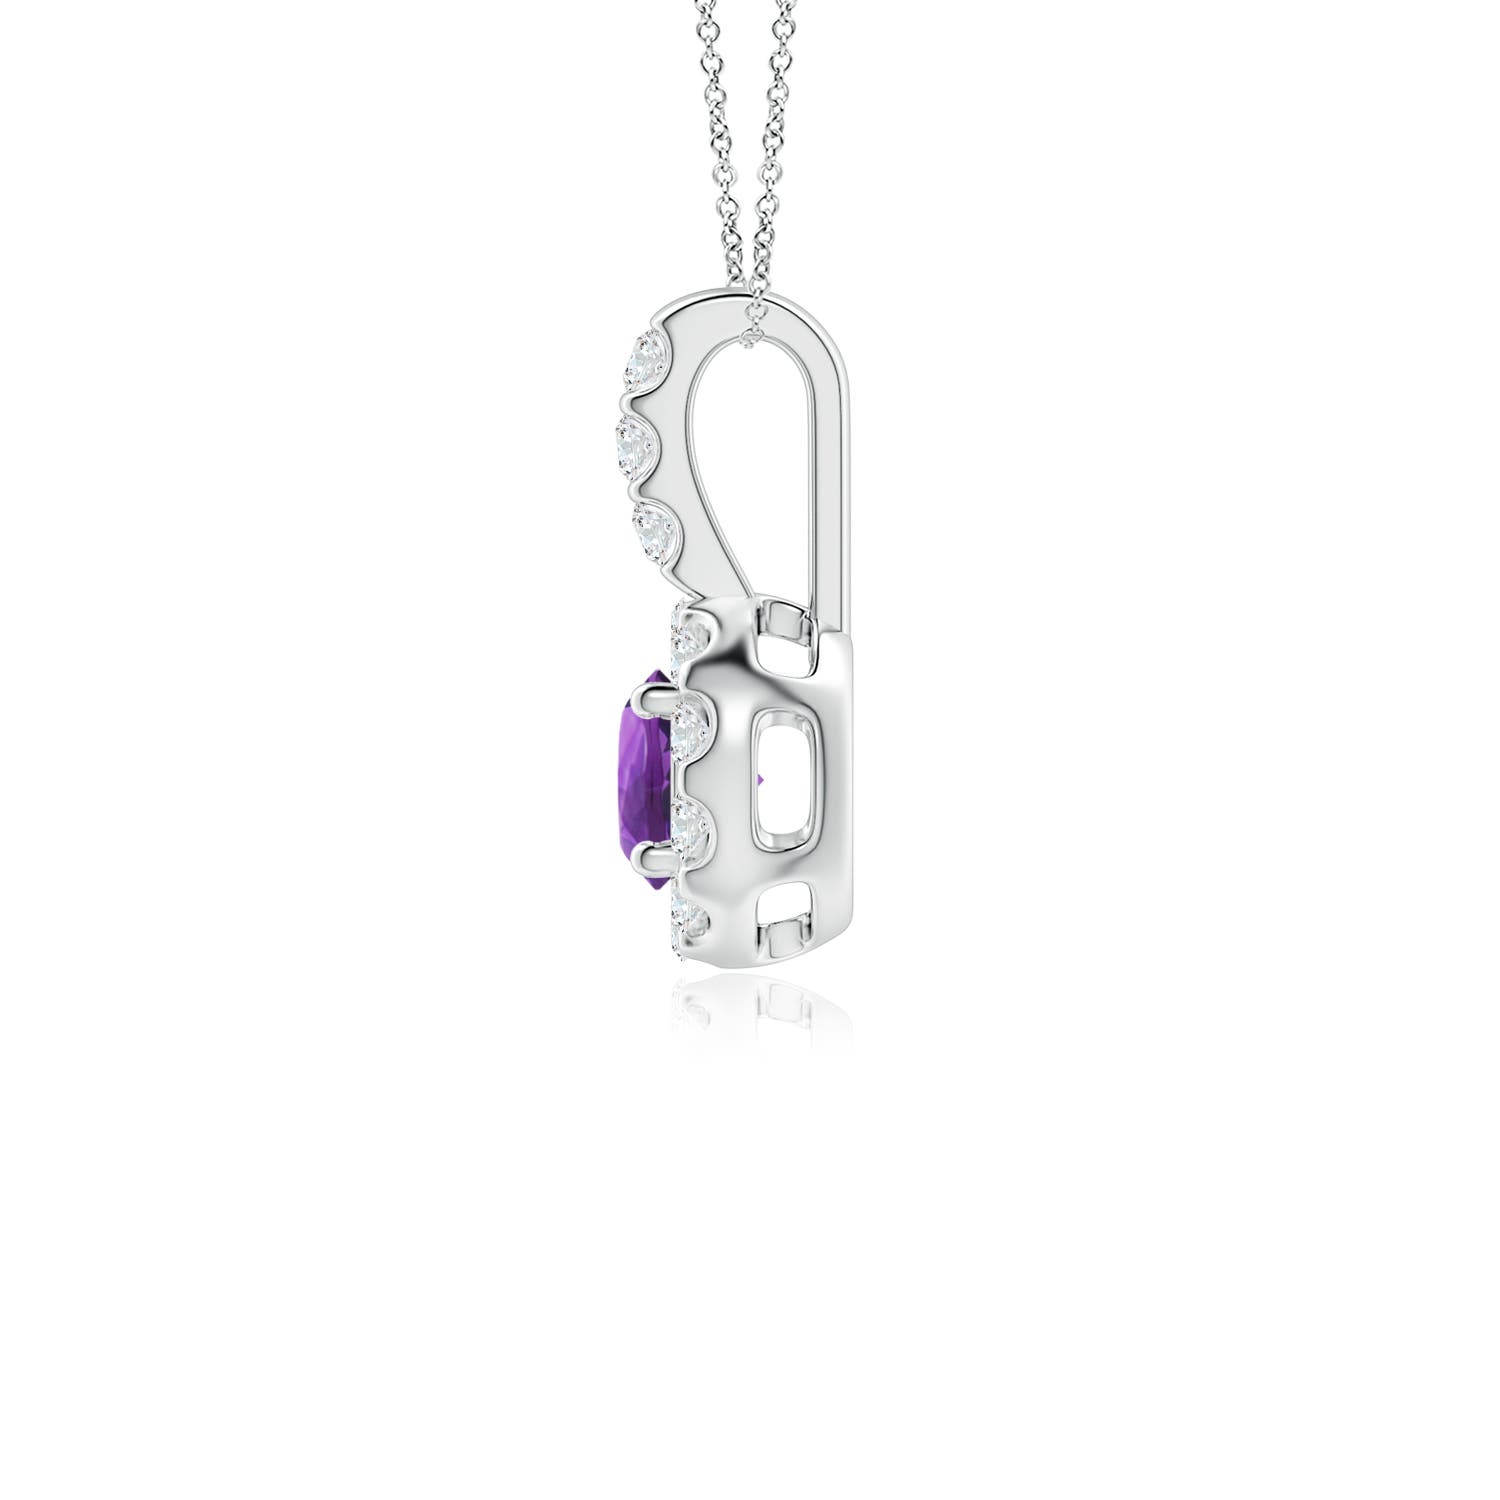 AAA - Amethyst / 0.38 CT / 14 KT White Gold